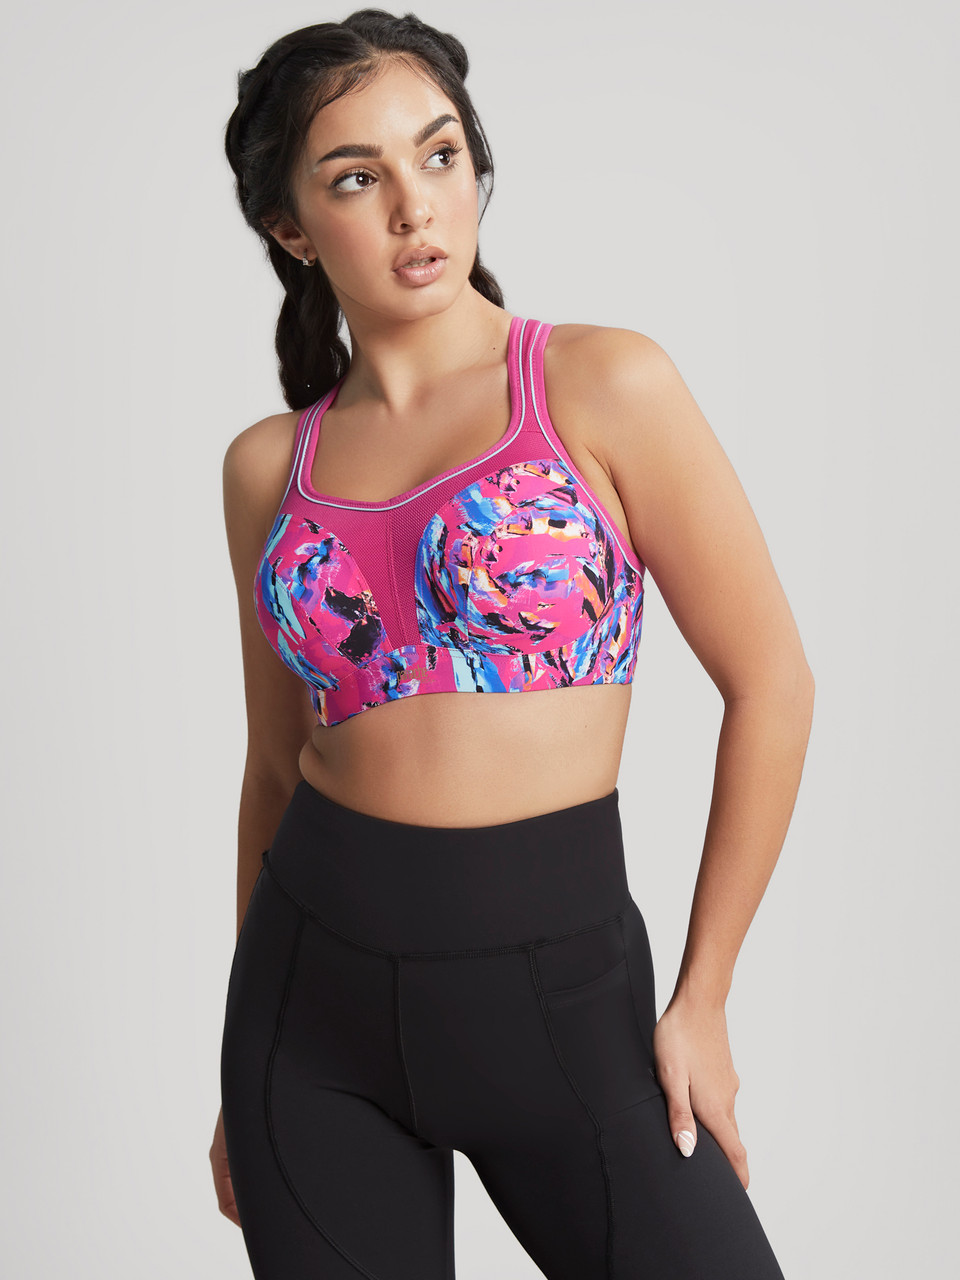 Panache Underwire Sports Bra (5021),40D,Abstract Orchid